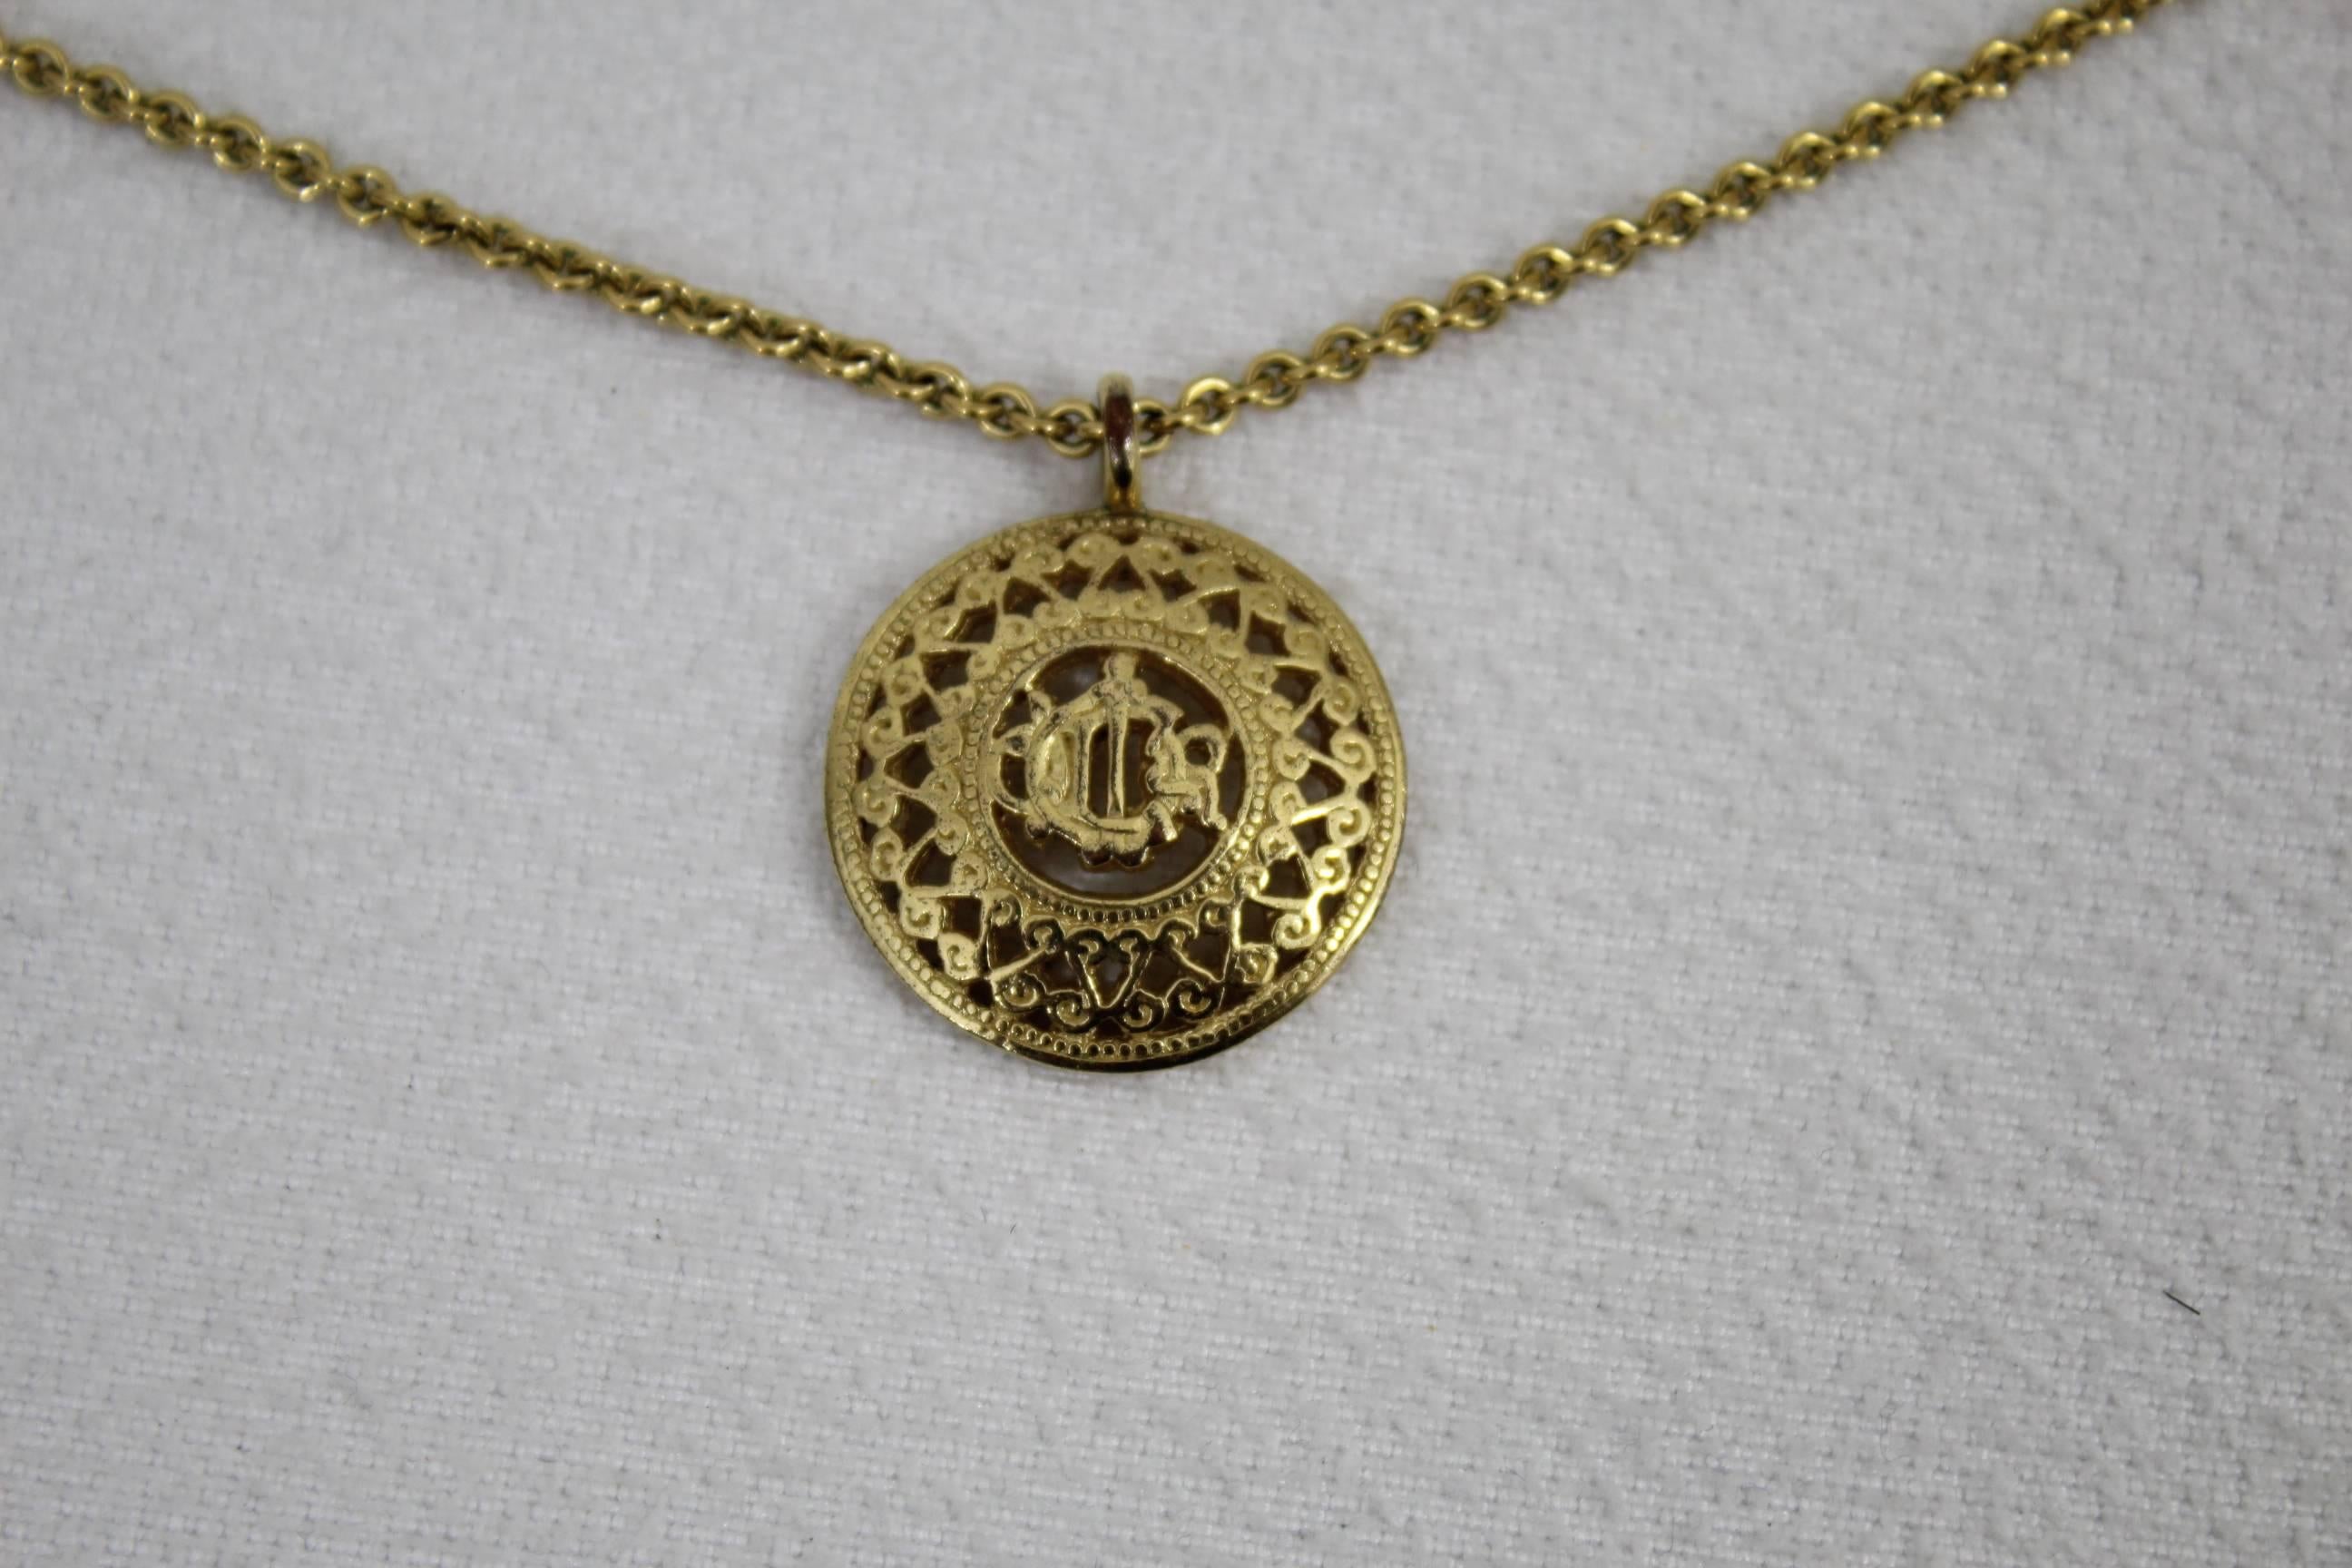 Really nice Christian Dior Gold plated Necklace with the logo of the fashion house.

good condition however it prresents some signs of wear

Small charm in the clasp

Size of the pendant: 1.1 inches